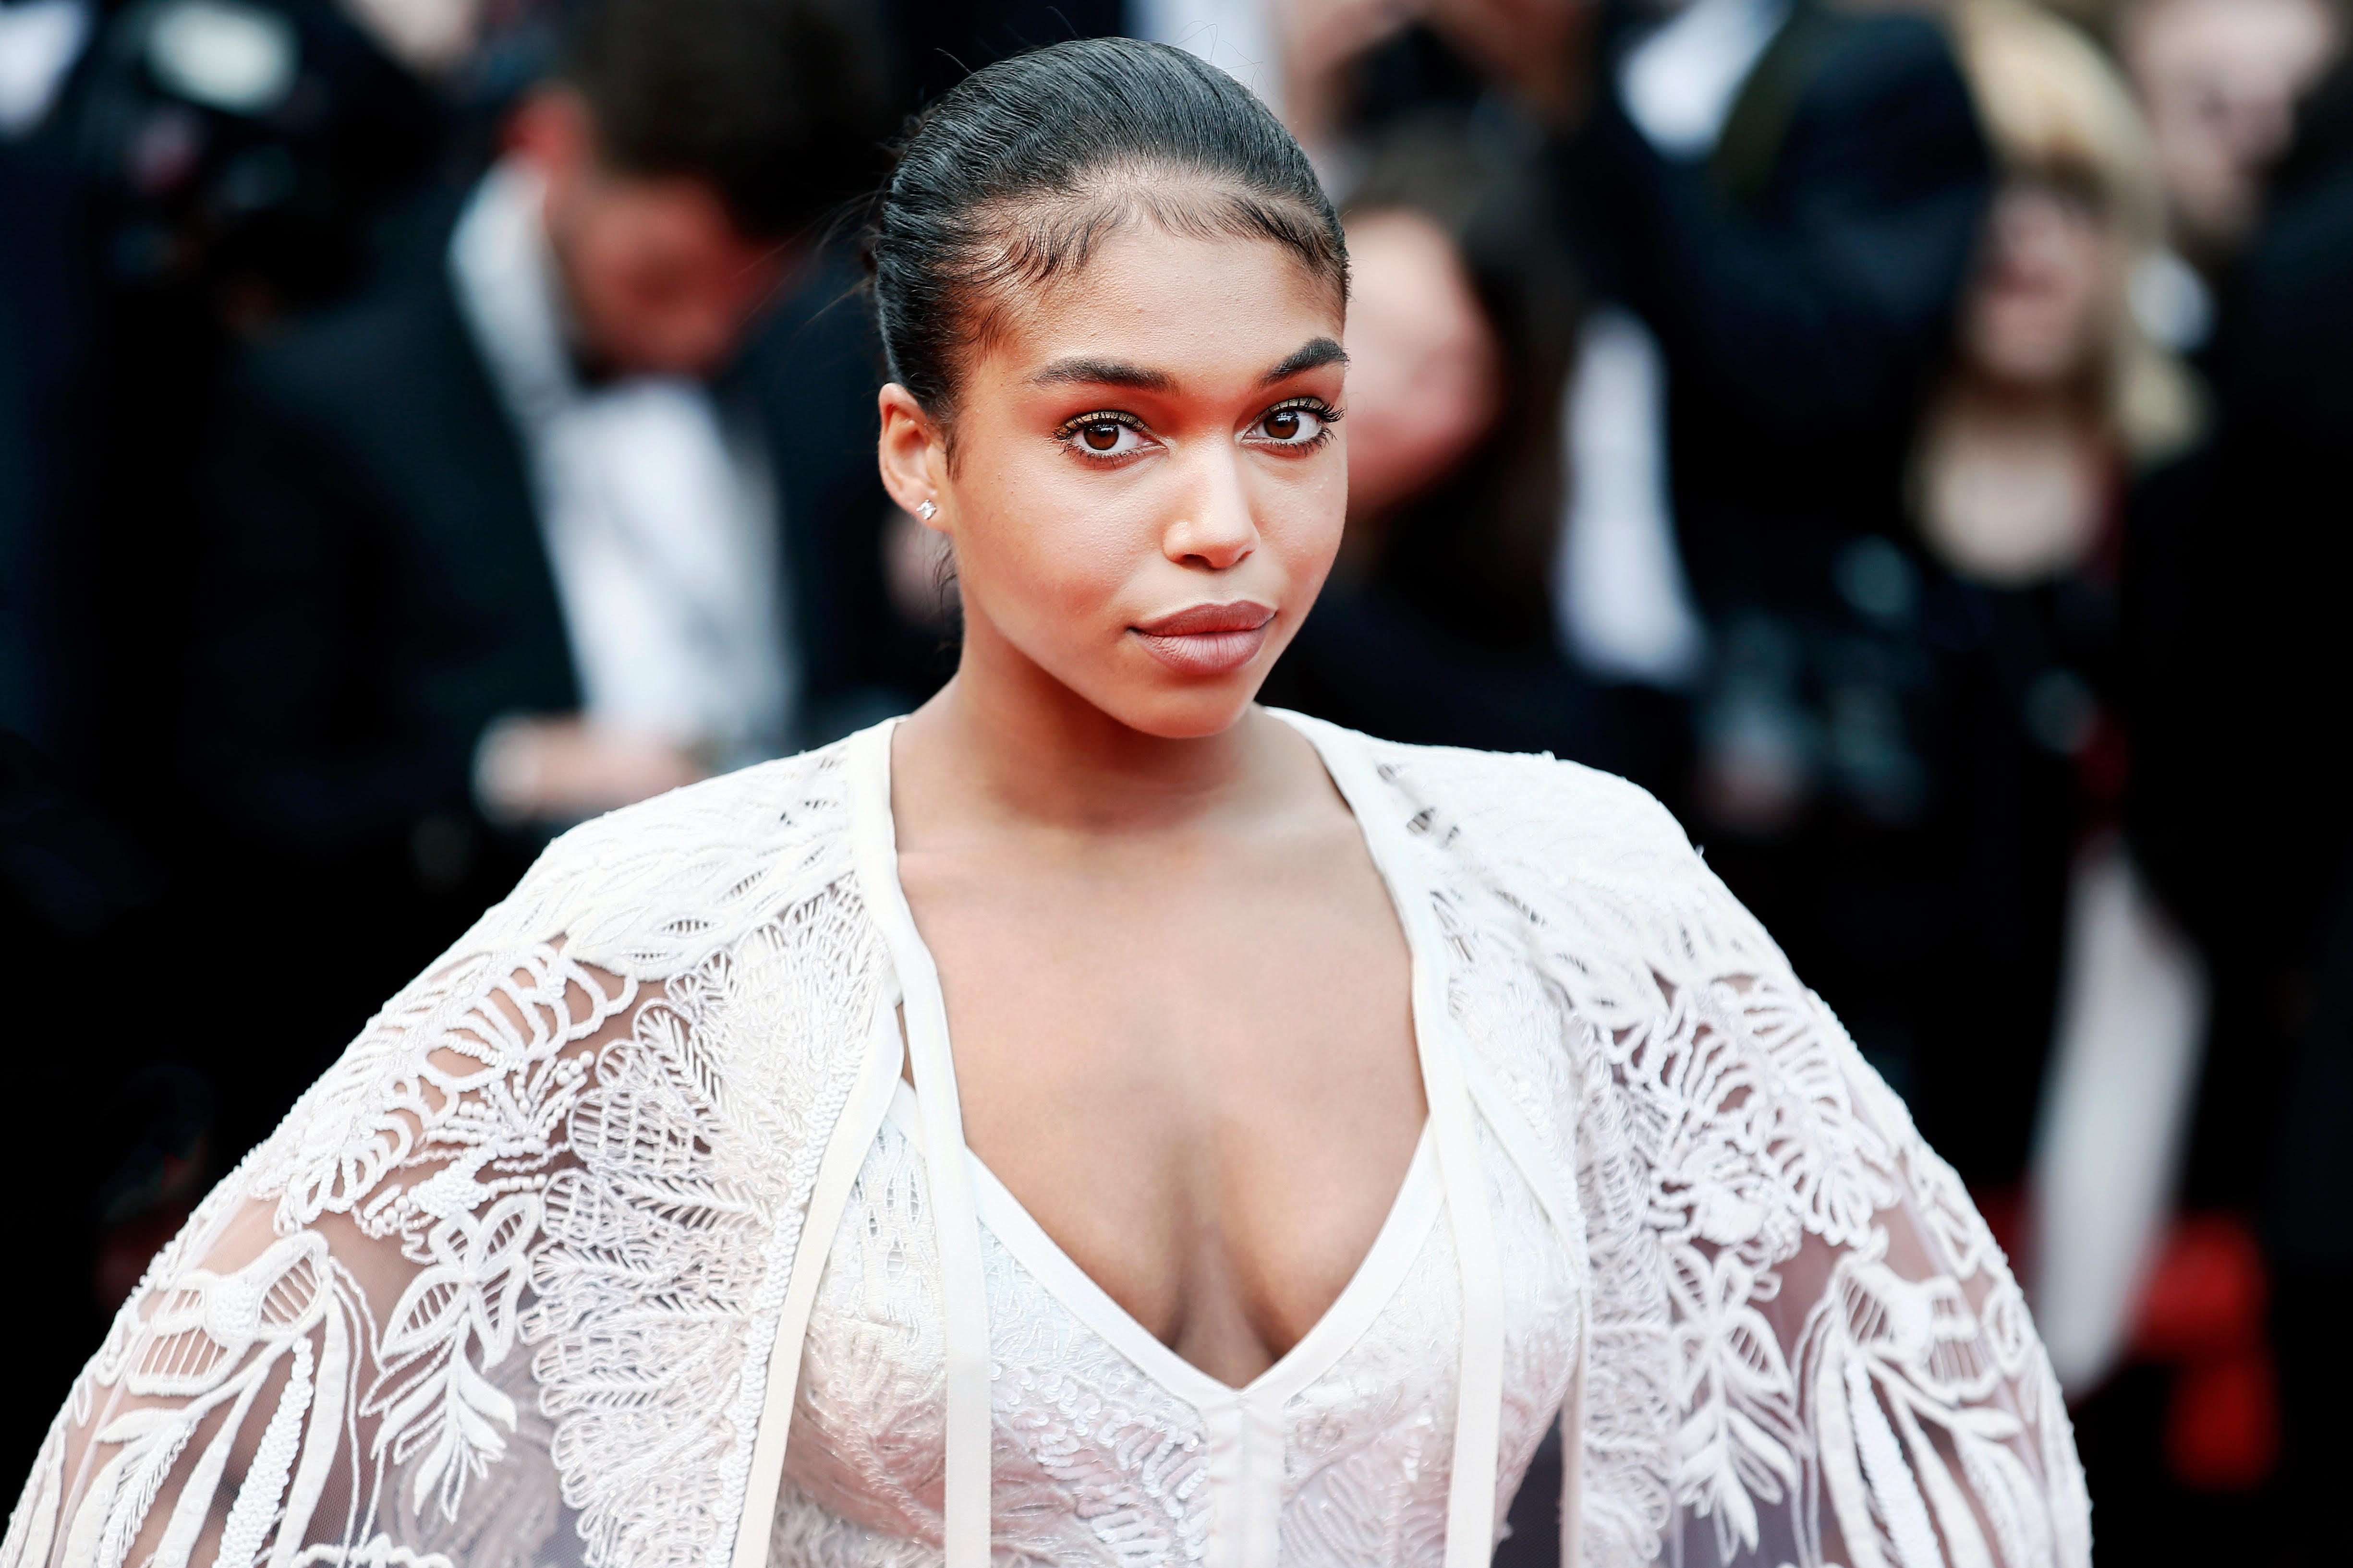 Relation-tips: Could Lori Harvey be too young to be on Diddy's wish